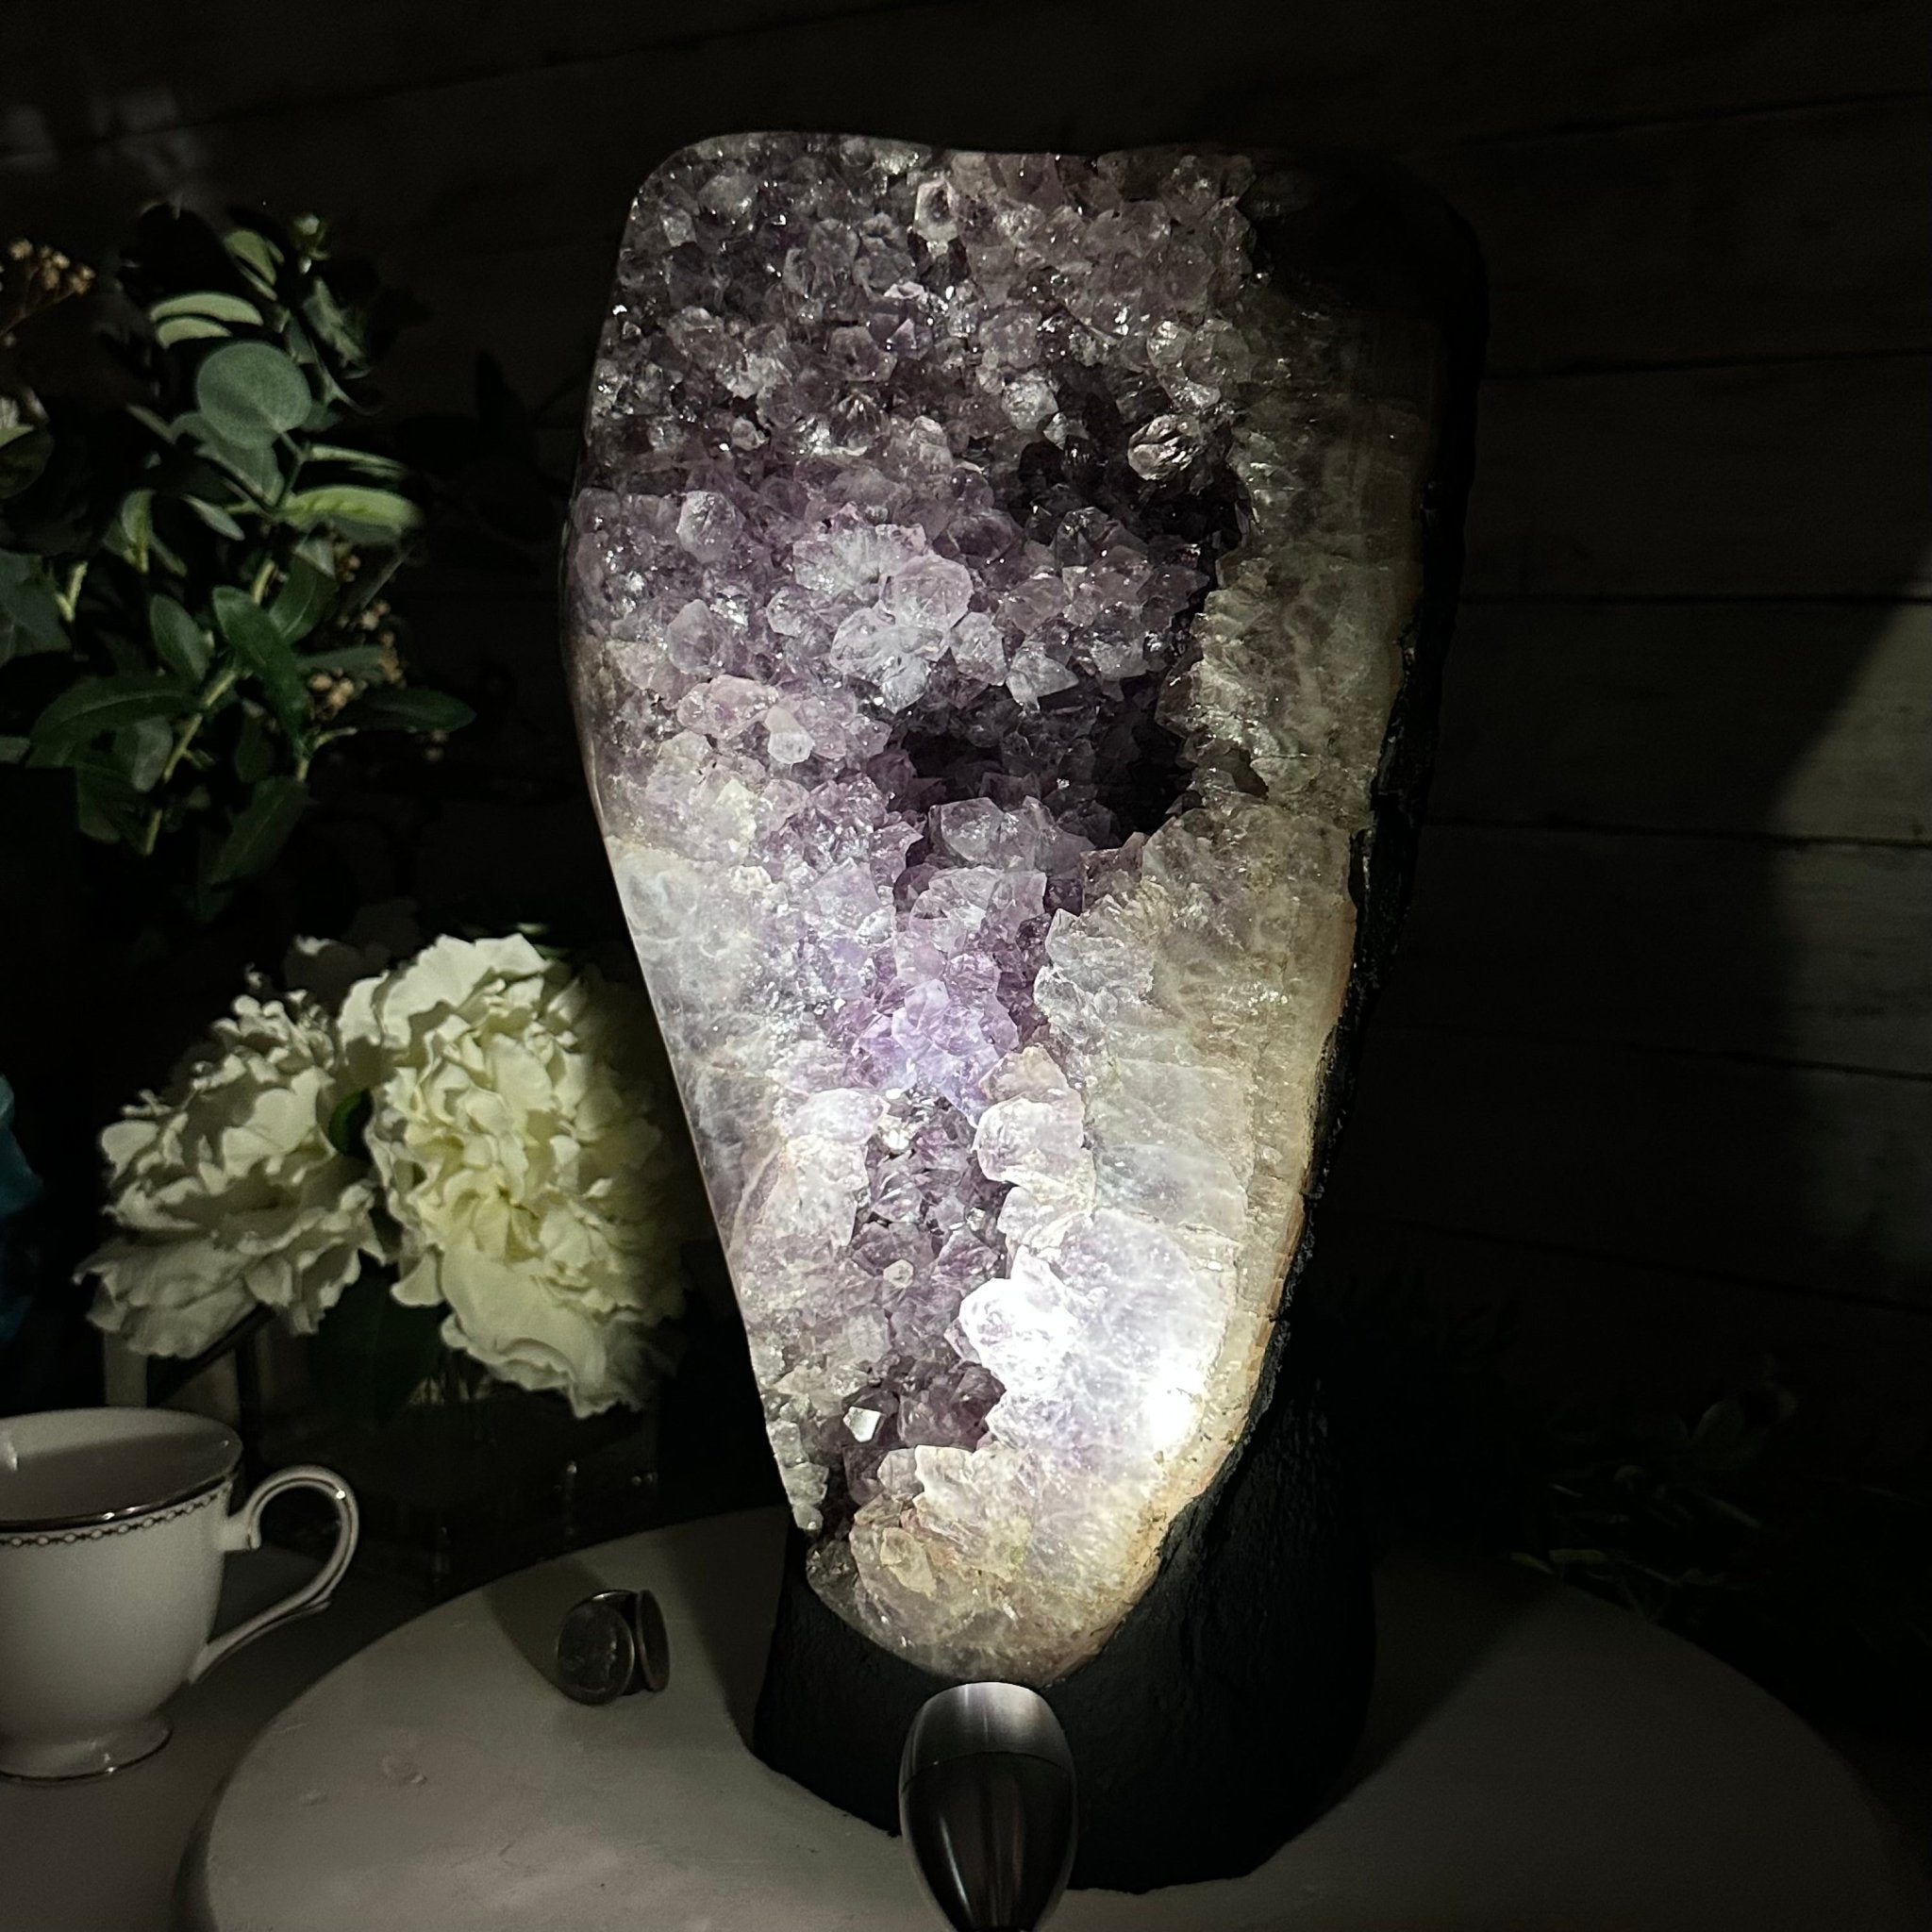 Standard Quality Amethyst Crystal on Cement Base, 21.9 lbs and 14" Tall #5614-0077 by Brazil Gems - Brazil GemsBrazil GemsStandard Quality Amethyst Crystal on Cement Base, 21.9 lbs and 14" Tall #5614-0077 by Brazil GemsClusters on Cement Bases5614-0077